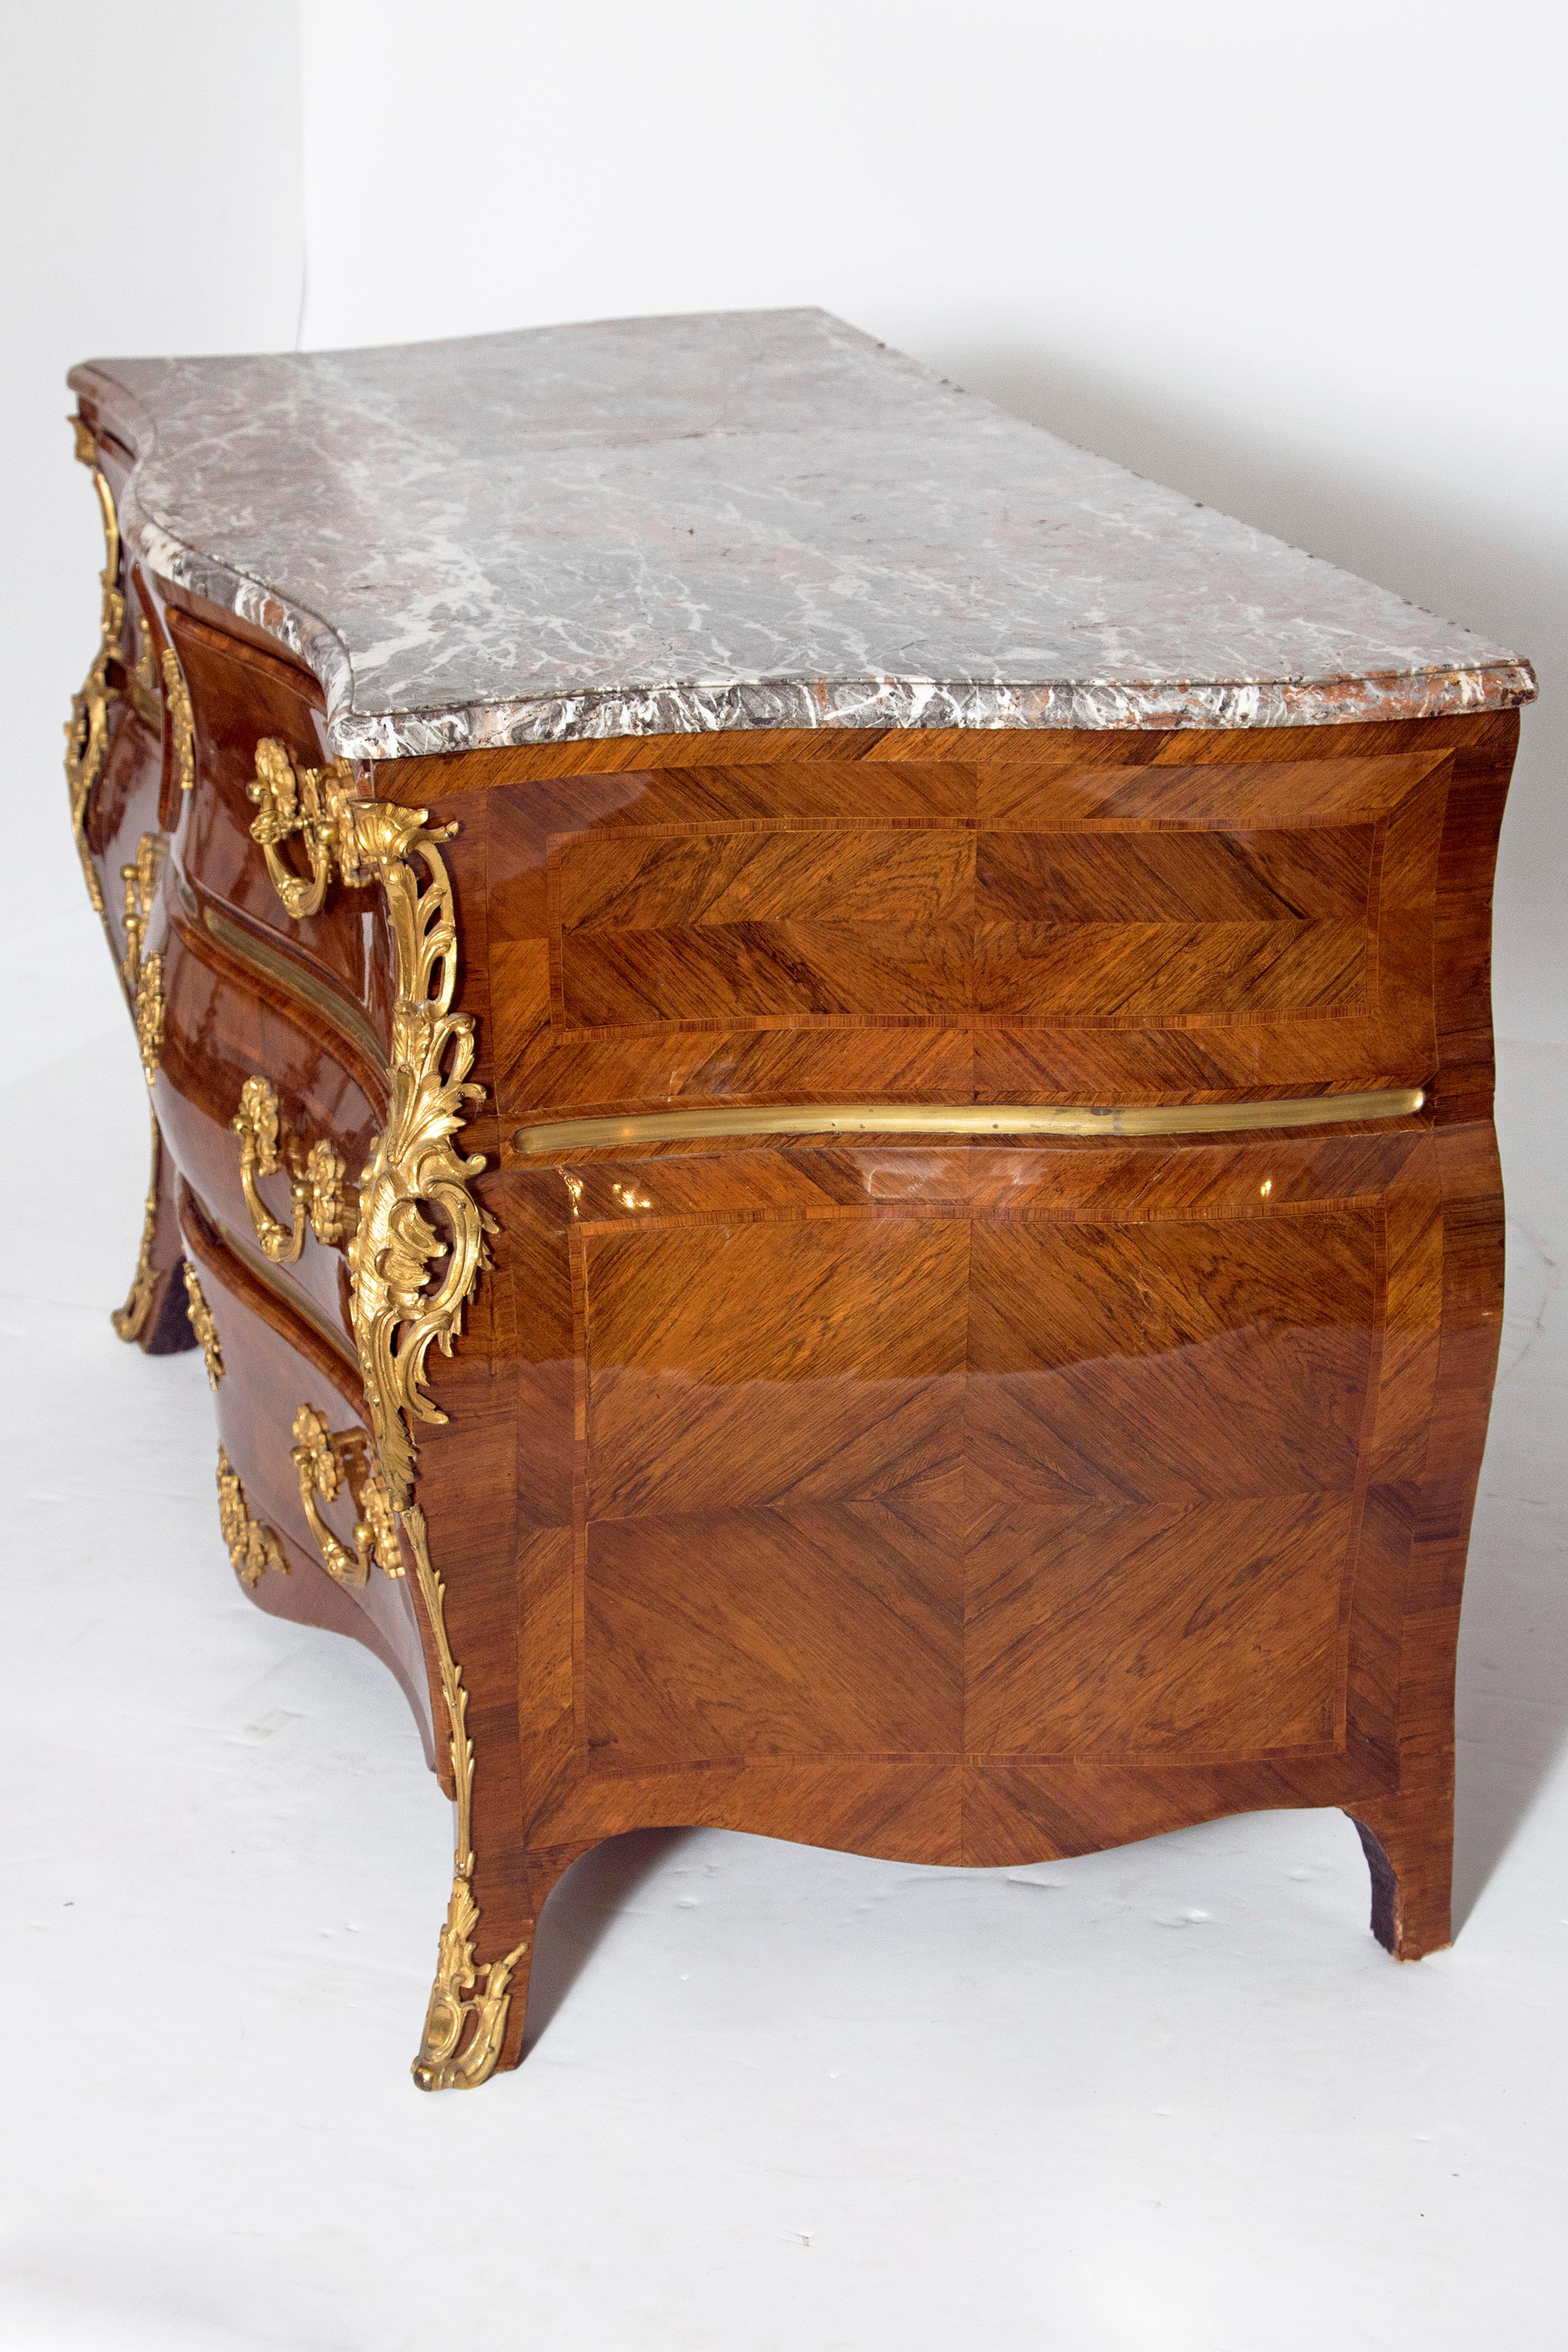 Early 18th Century French Regence Dore Bronze Bombe Commode In Good Condition For Sale In Dallas, TX